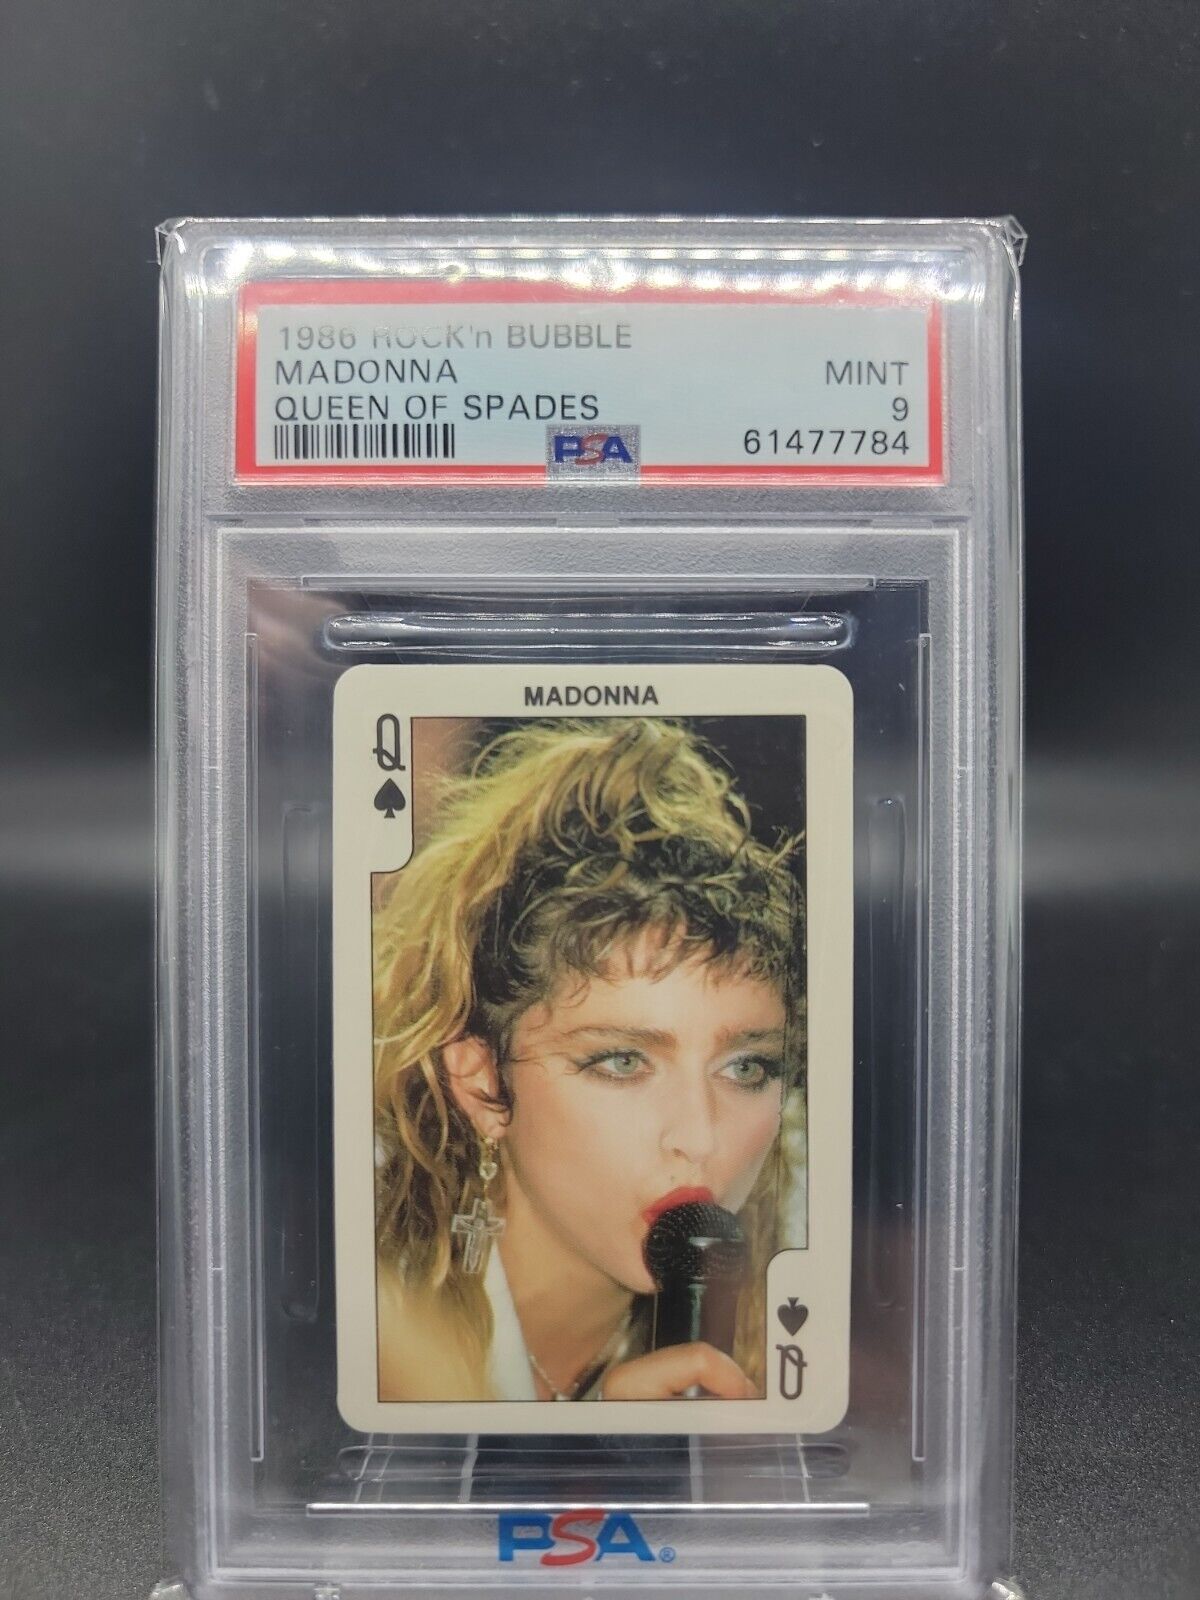 1986 Rock n Bubble MADONNA Rookie Card PSA 9 NONE HIGHER